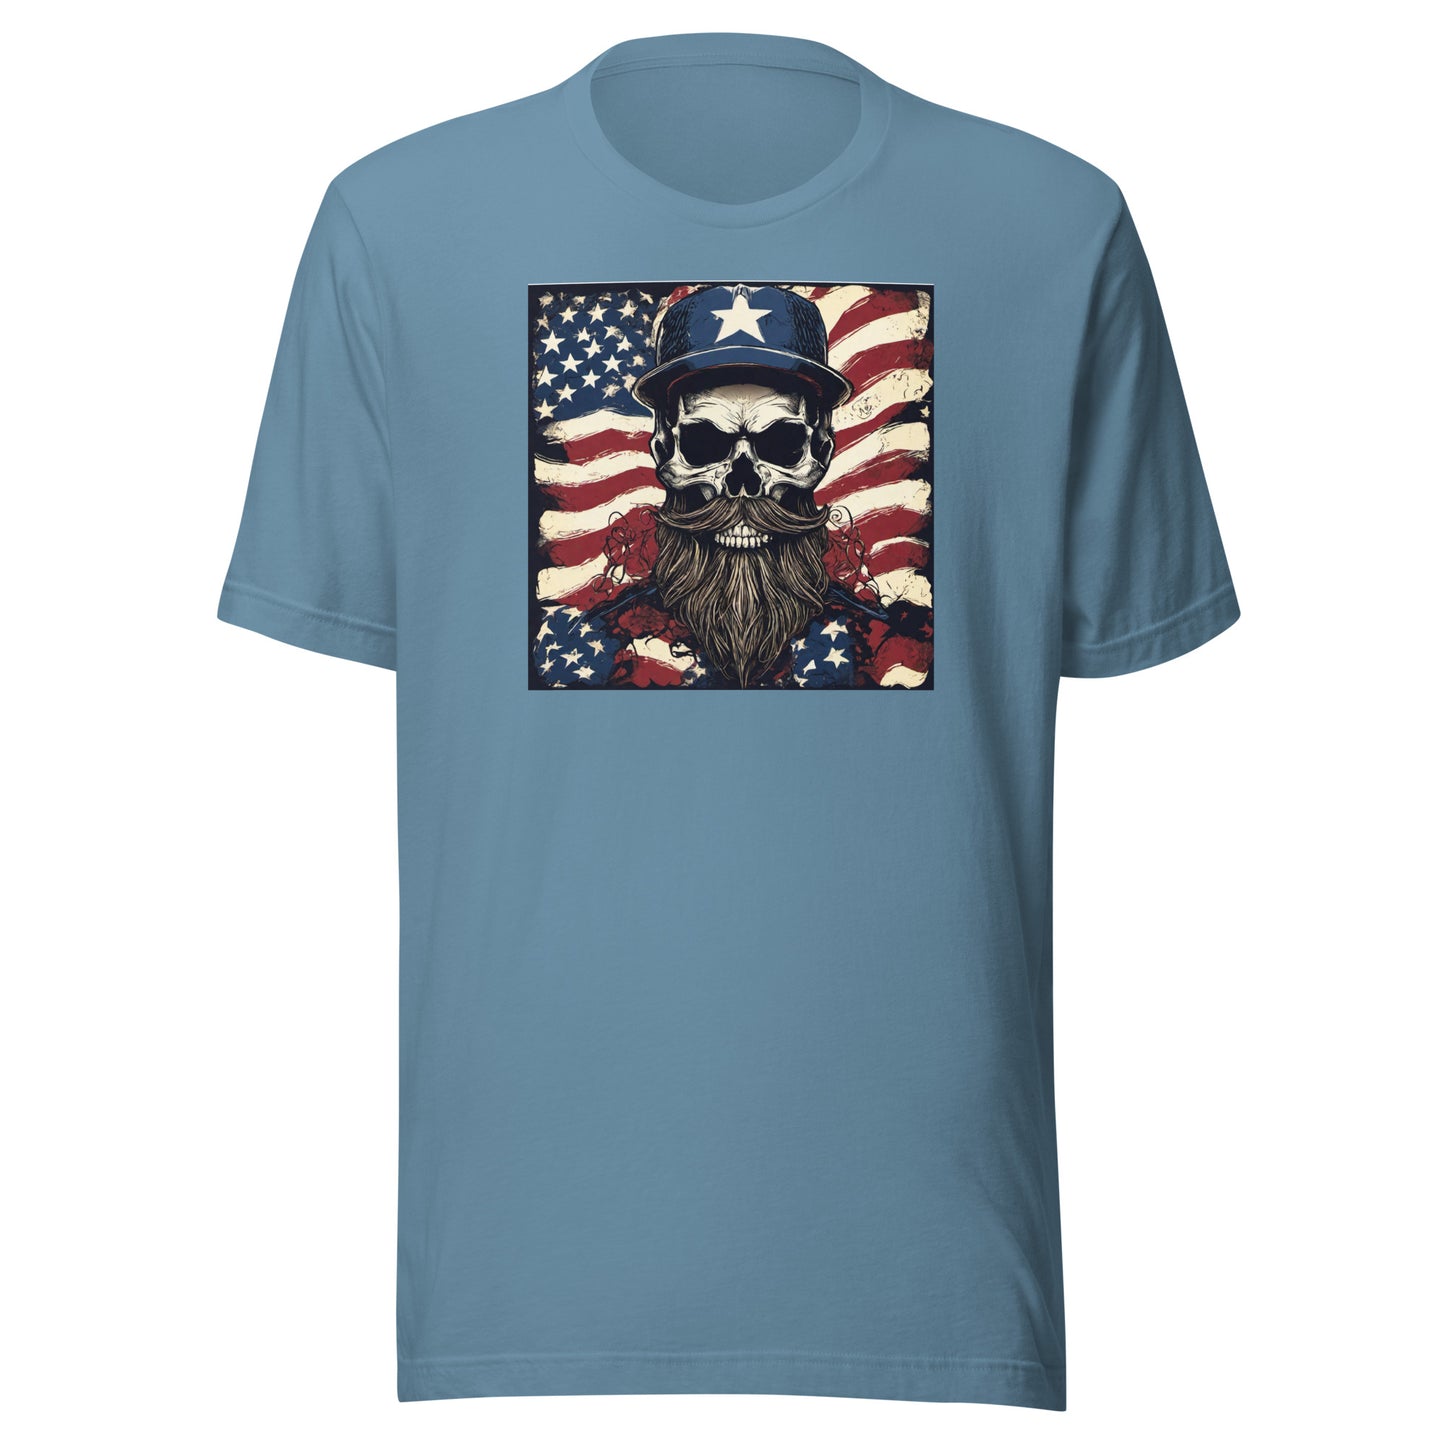 Handsome American Reaper Graphic T-Shirt Steel Blue